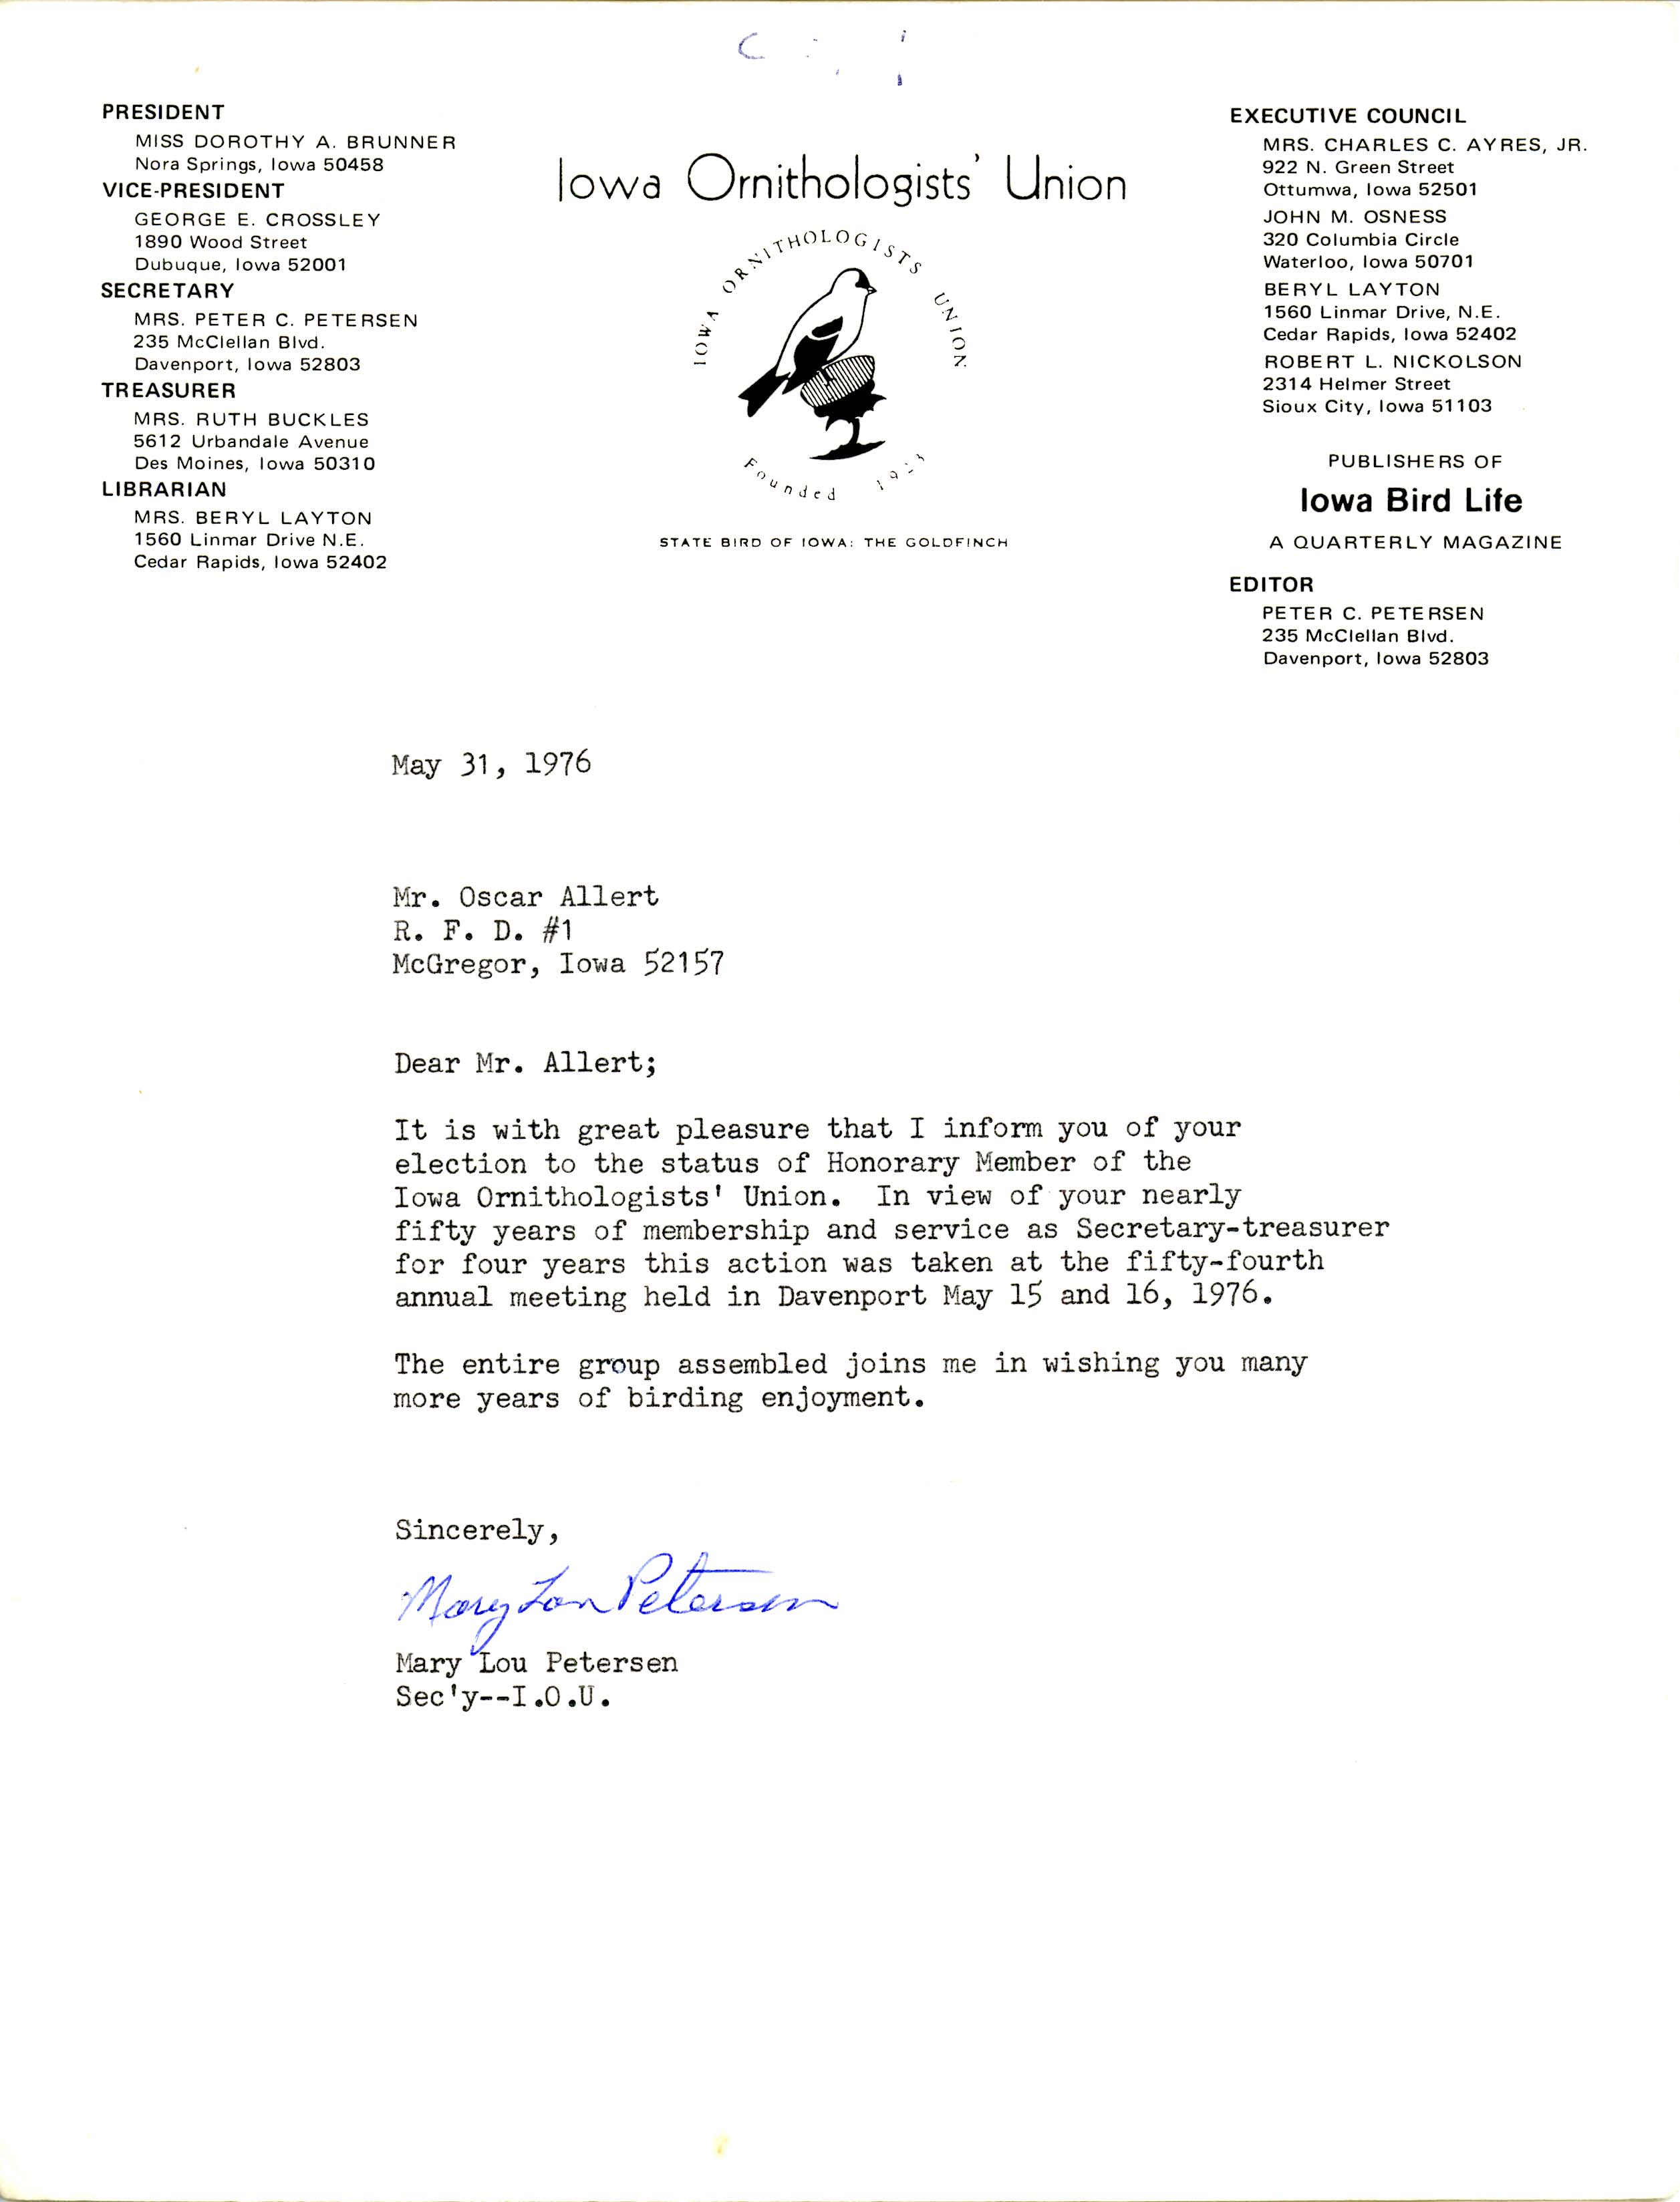 Mary Lou Petersen letter to Oscar Allert regarding honorary membership in the Iowa Ornithologists' Union, May 31, 1976